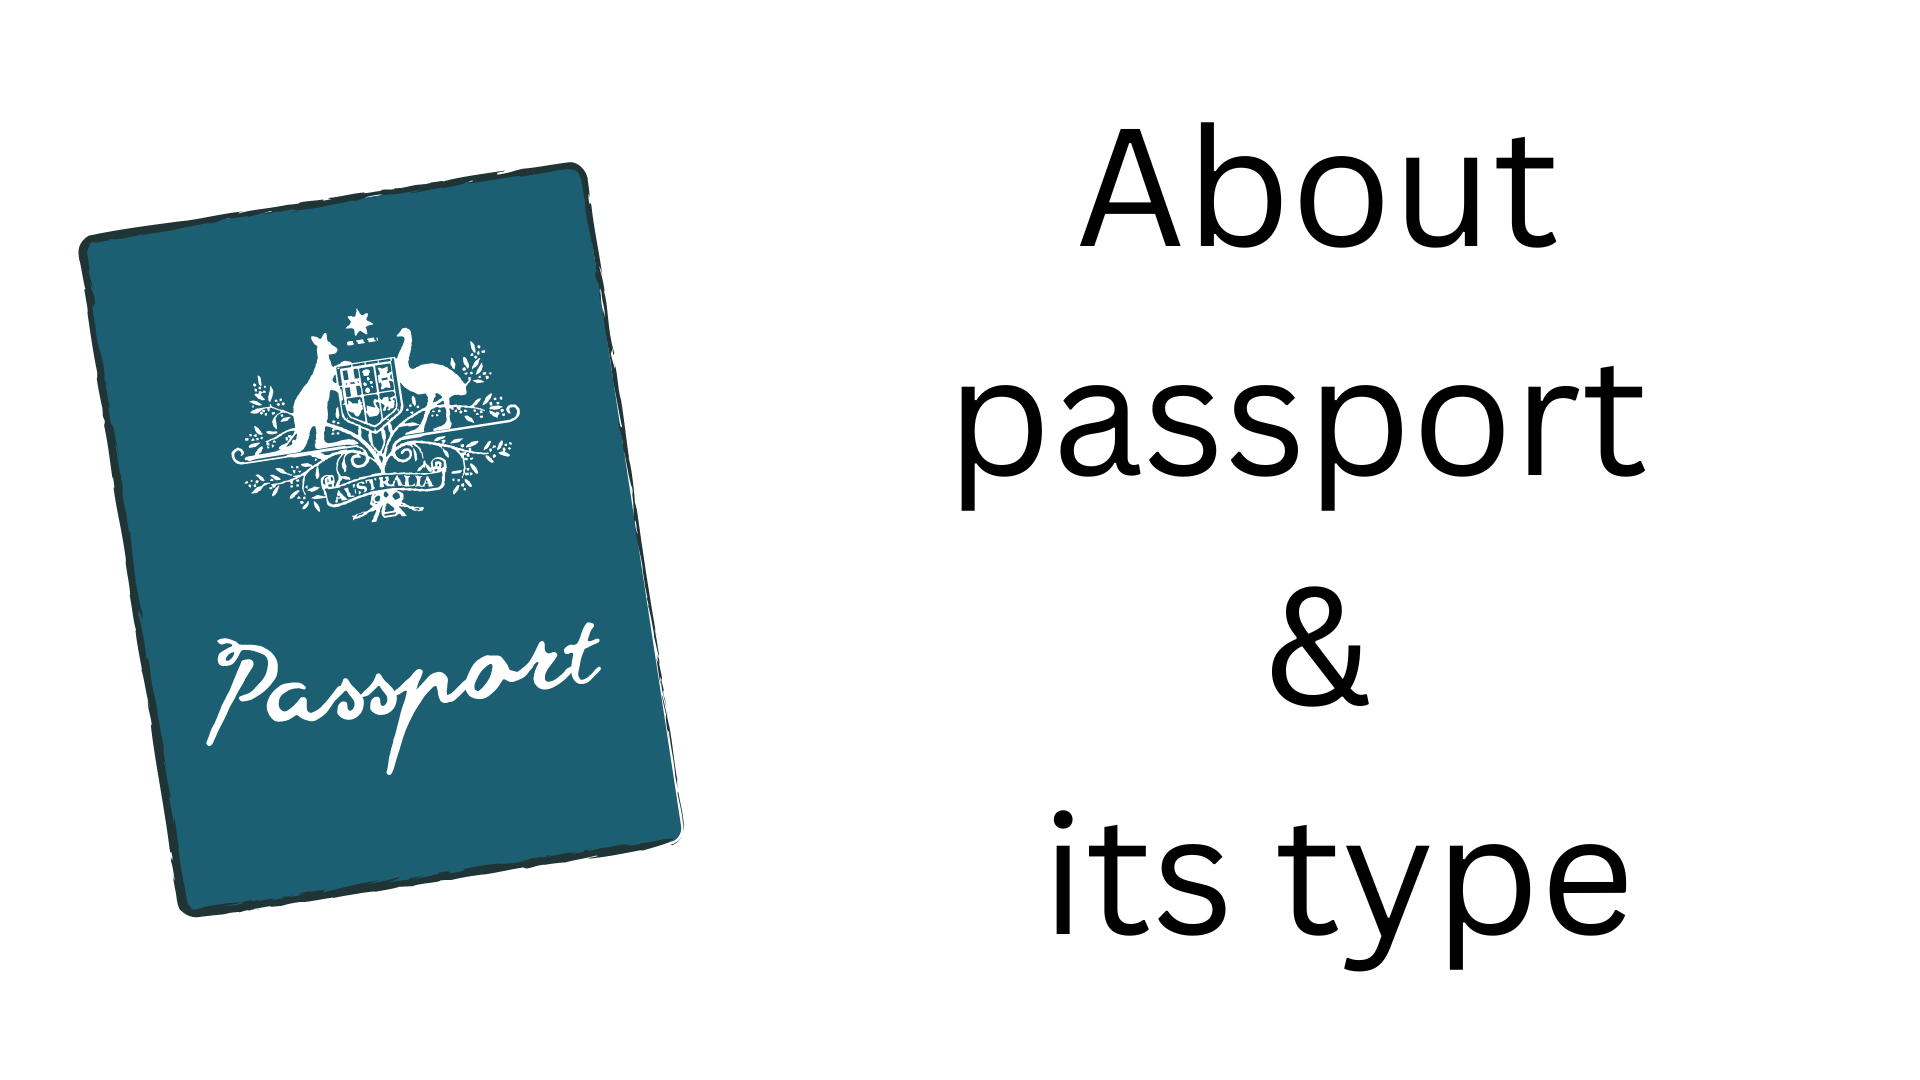 About passport & its type